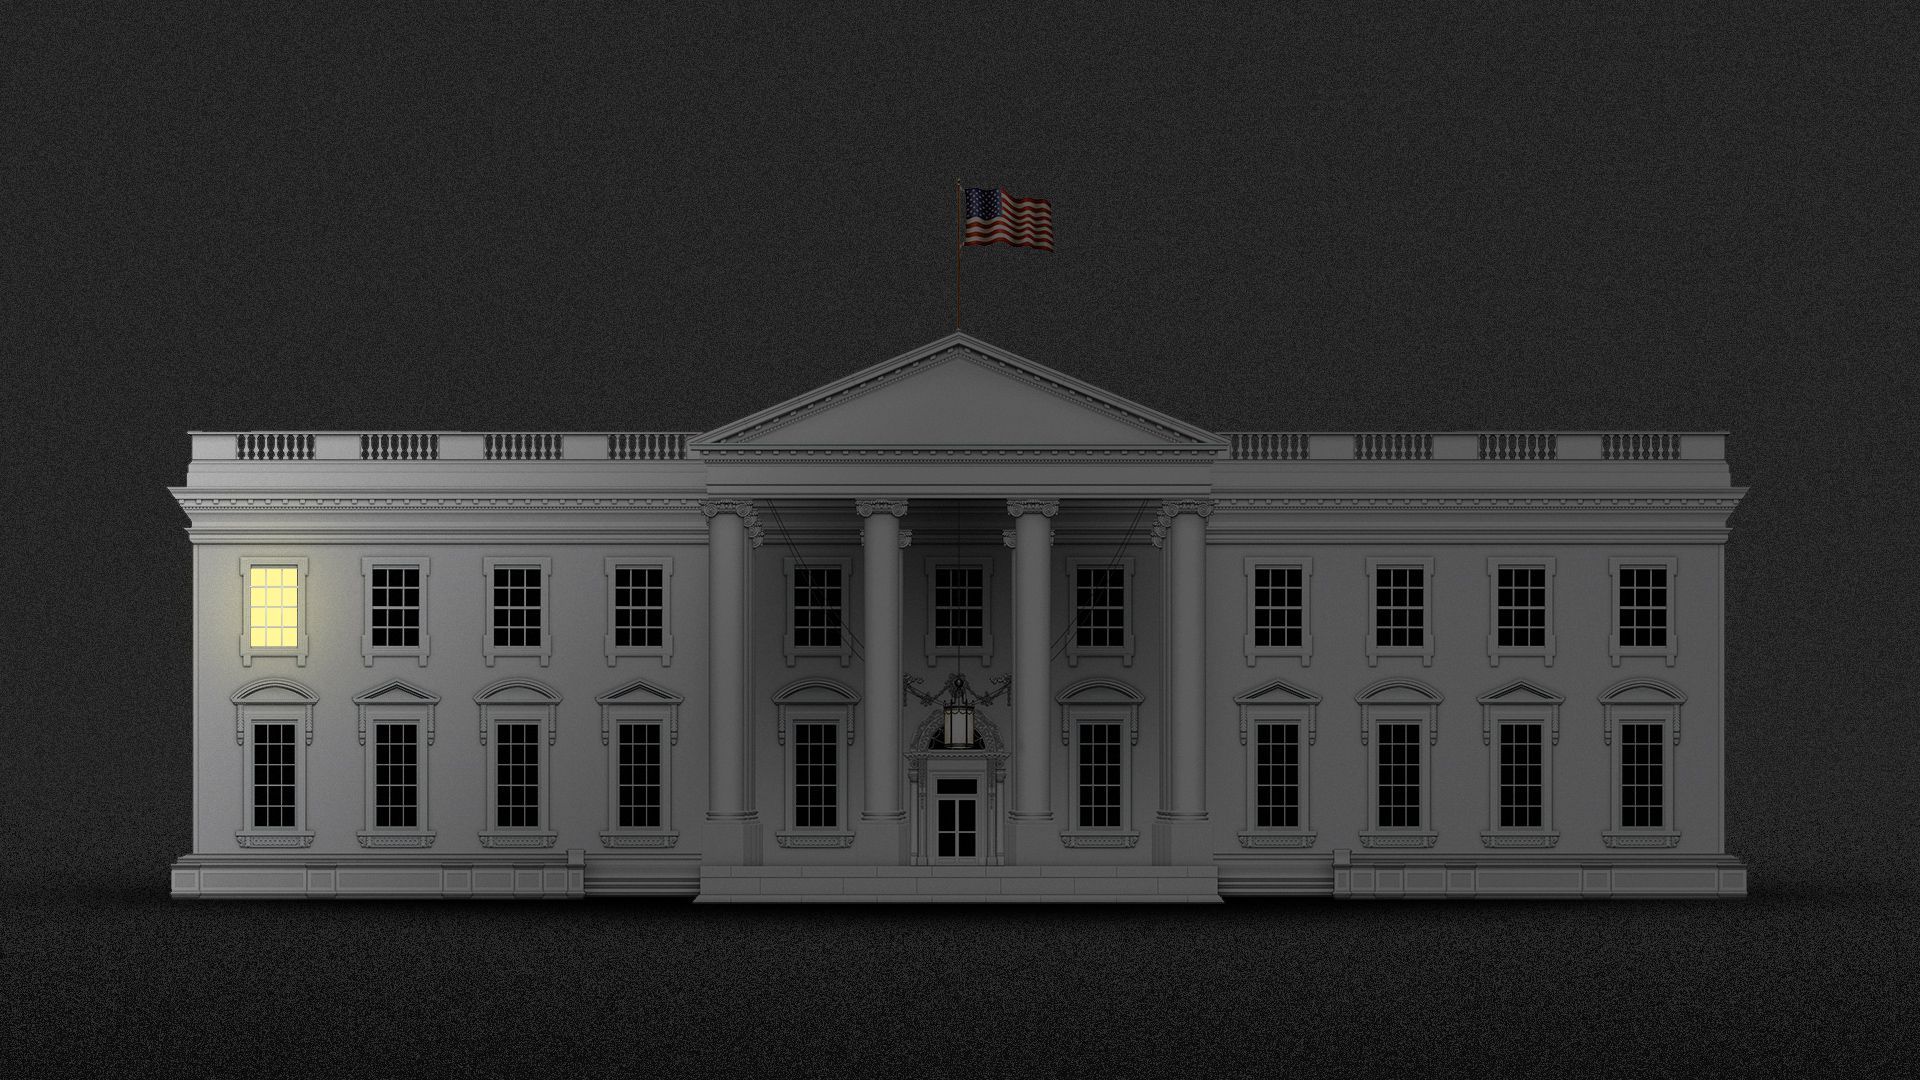 Illustration of the White House with a single lit window.